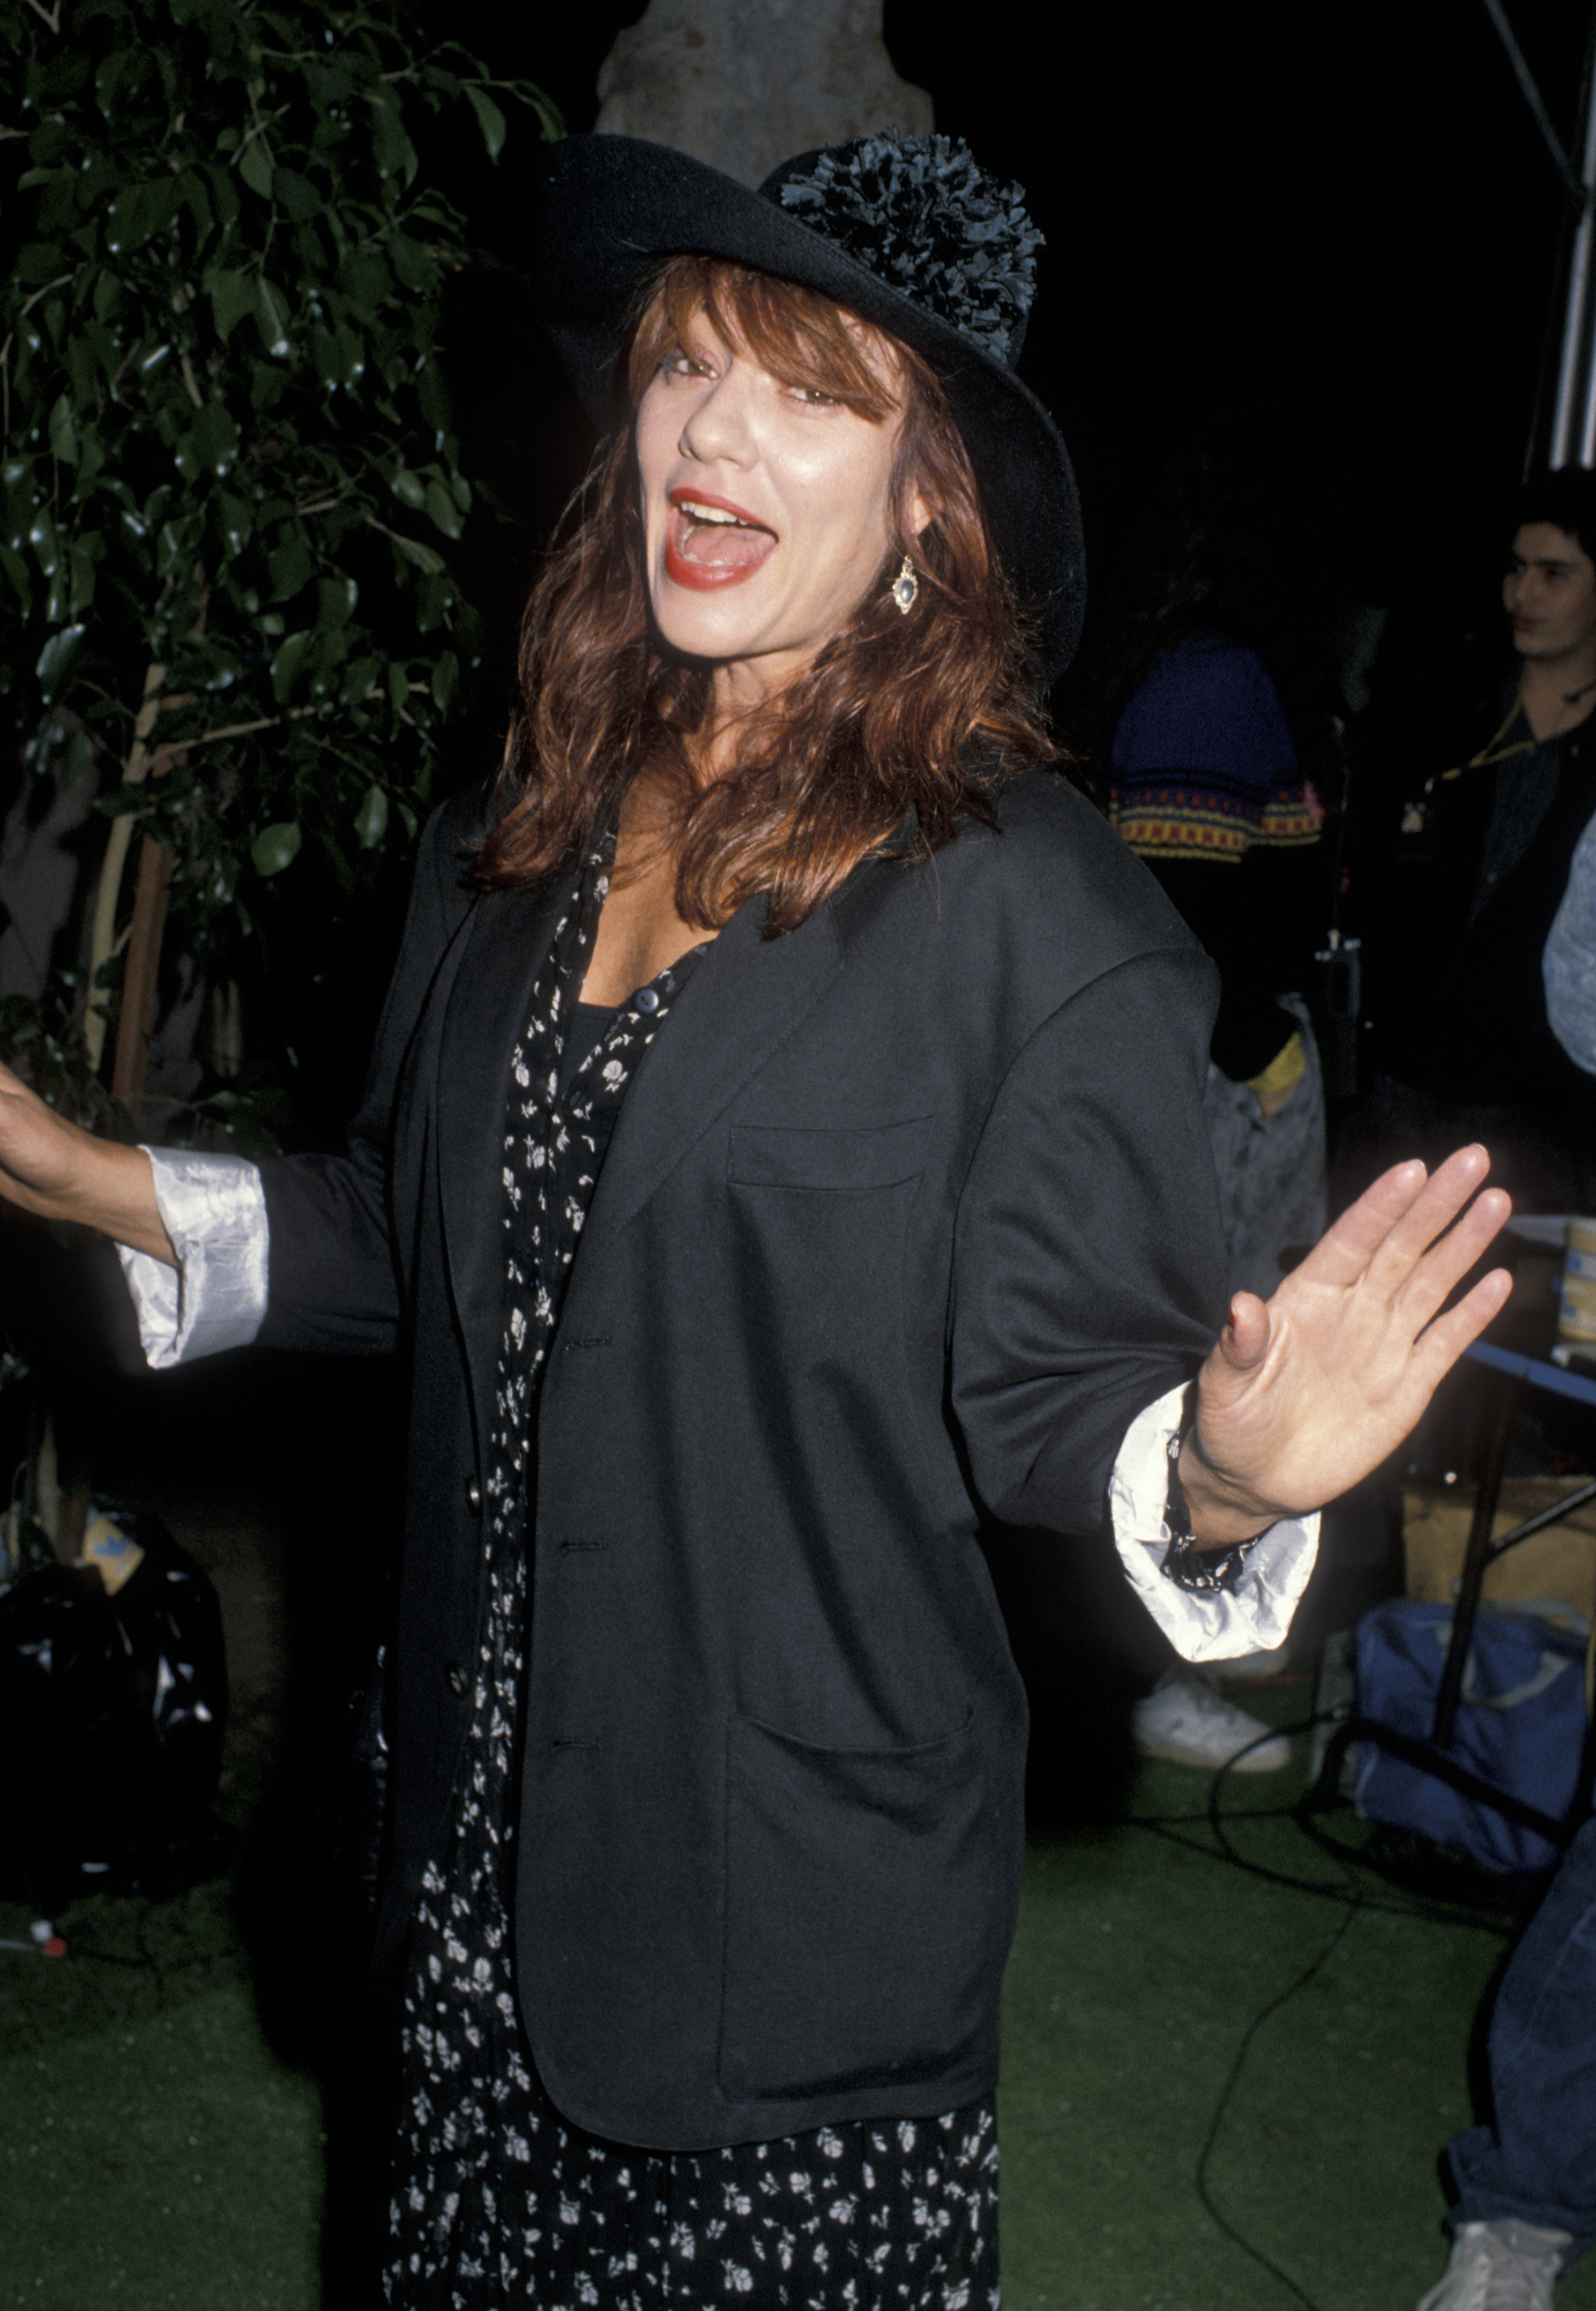 Katey Sagal at "Human Rights Now Rally" in Los Angeles, 1988 | Source: Getty Images